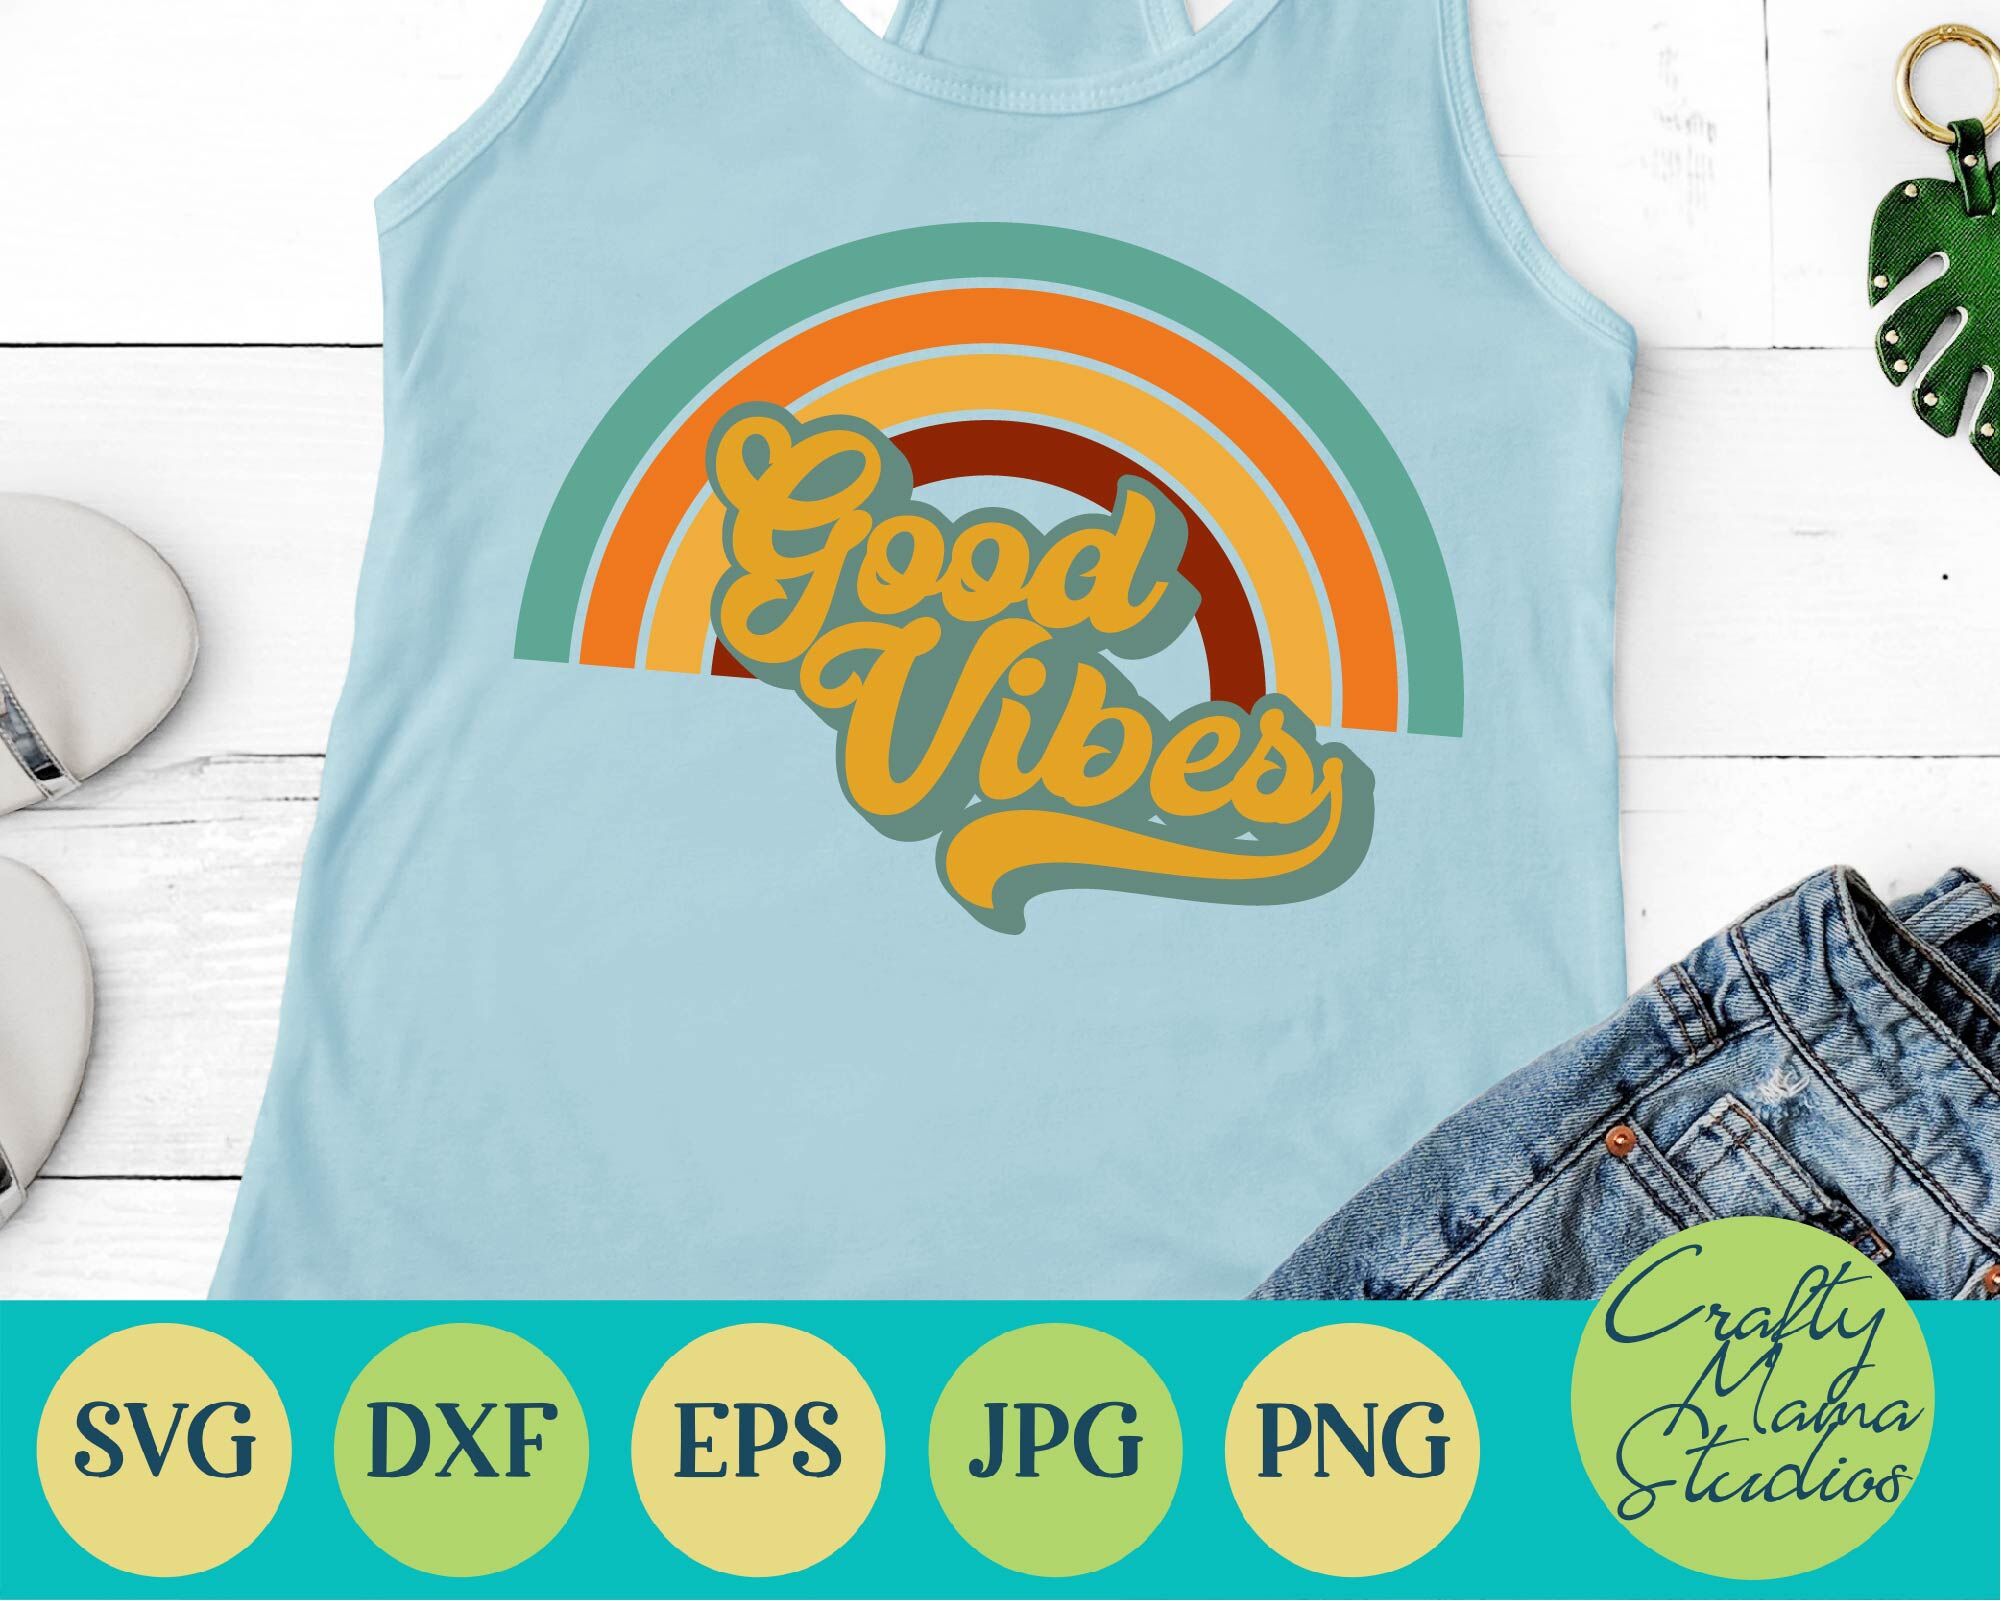 Download Good Vibes Svg, Retro Svg, Summer Svg By Crafty Mama ...